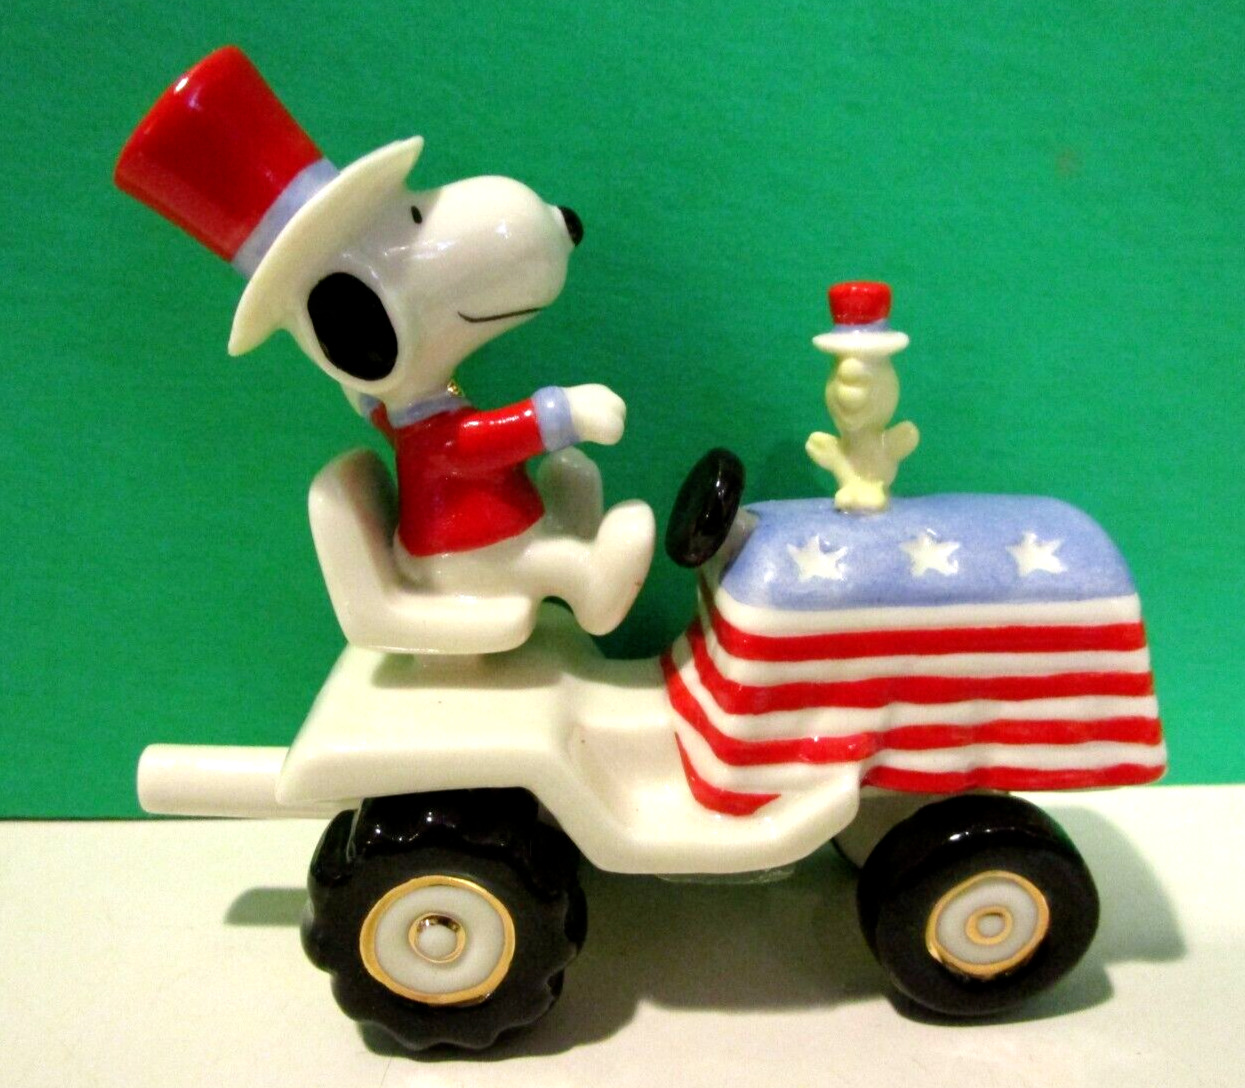 LENOX Peanuts SNOOPY TRACTOR WOODSTOCK It\'s Independence Day - NEW MINT - NO BOX